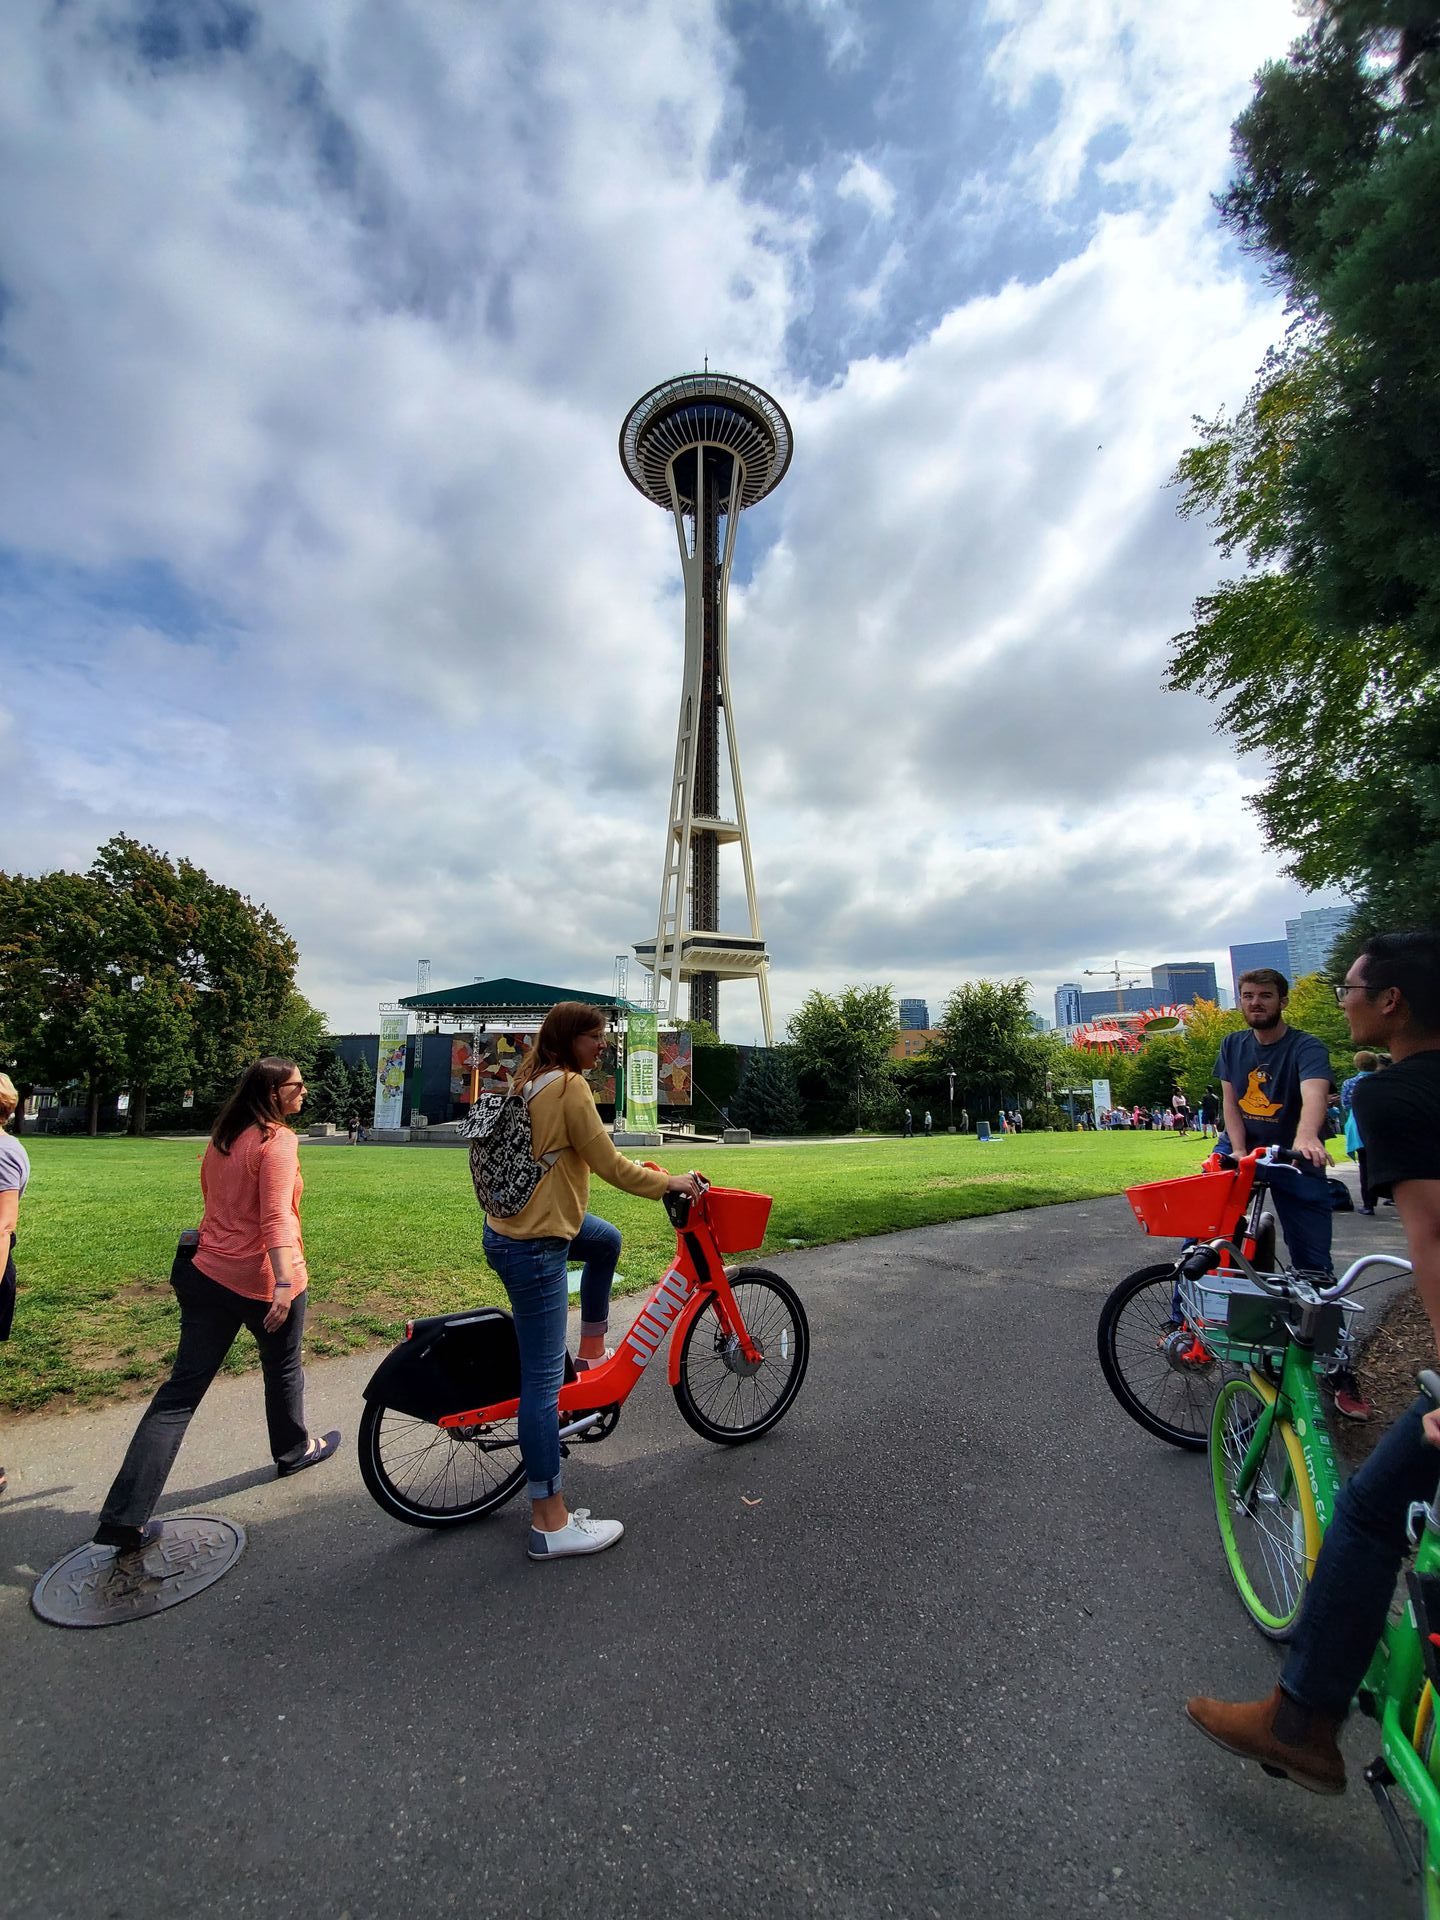 samsung galaxy note 10 plus camera sample ultrawide space needle 18